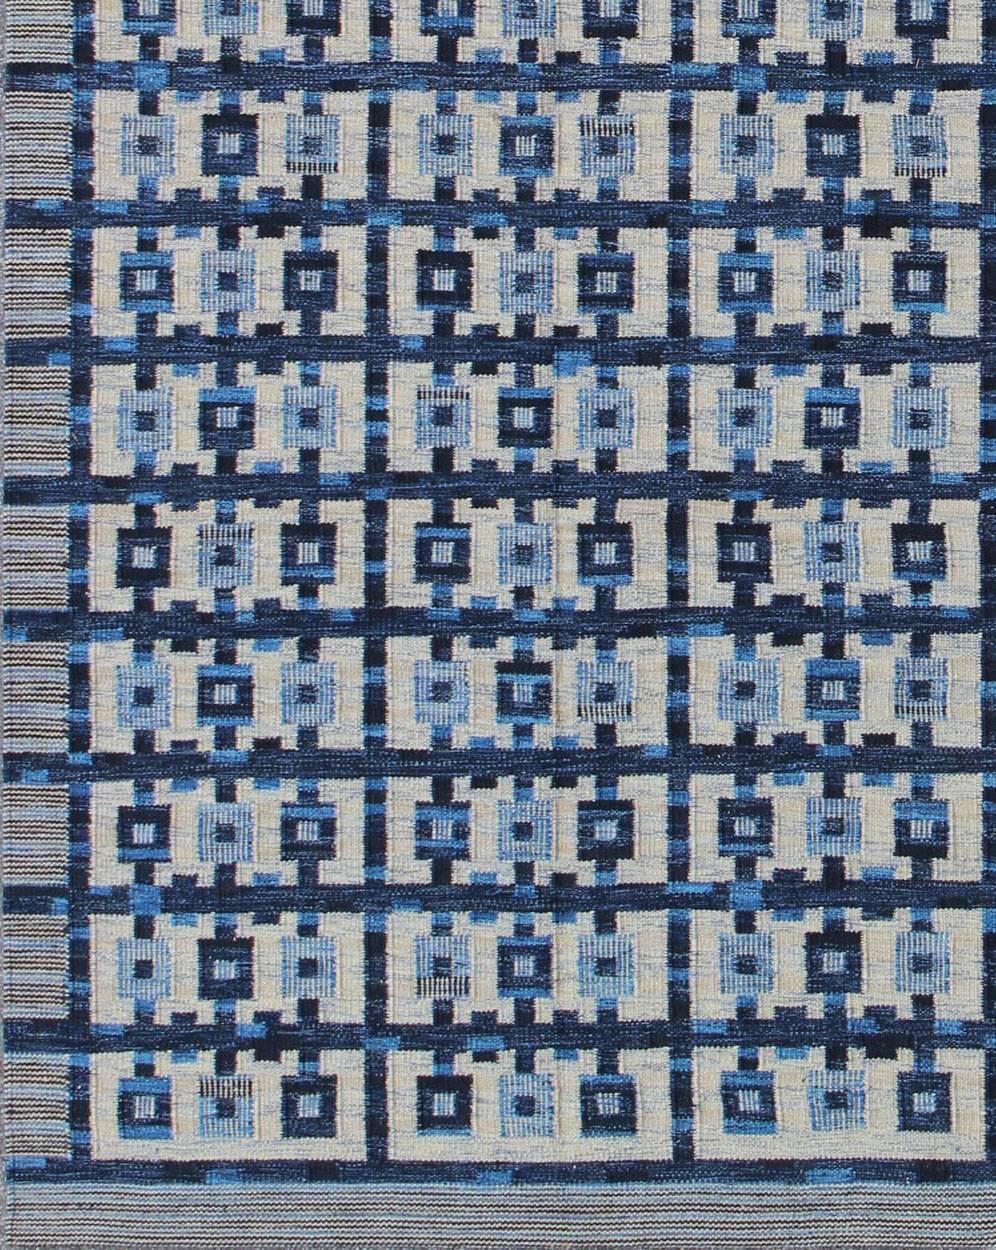 This Scandinavian Flat-Weave, patterned rug is inspired by the work of Swedish textile designers of the early to mid-20th Century. With a unique blend of historical and modern design, this dynamic and exciting composition is beautifully suited for